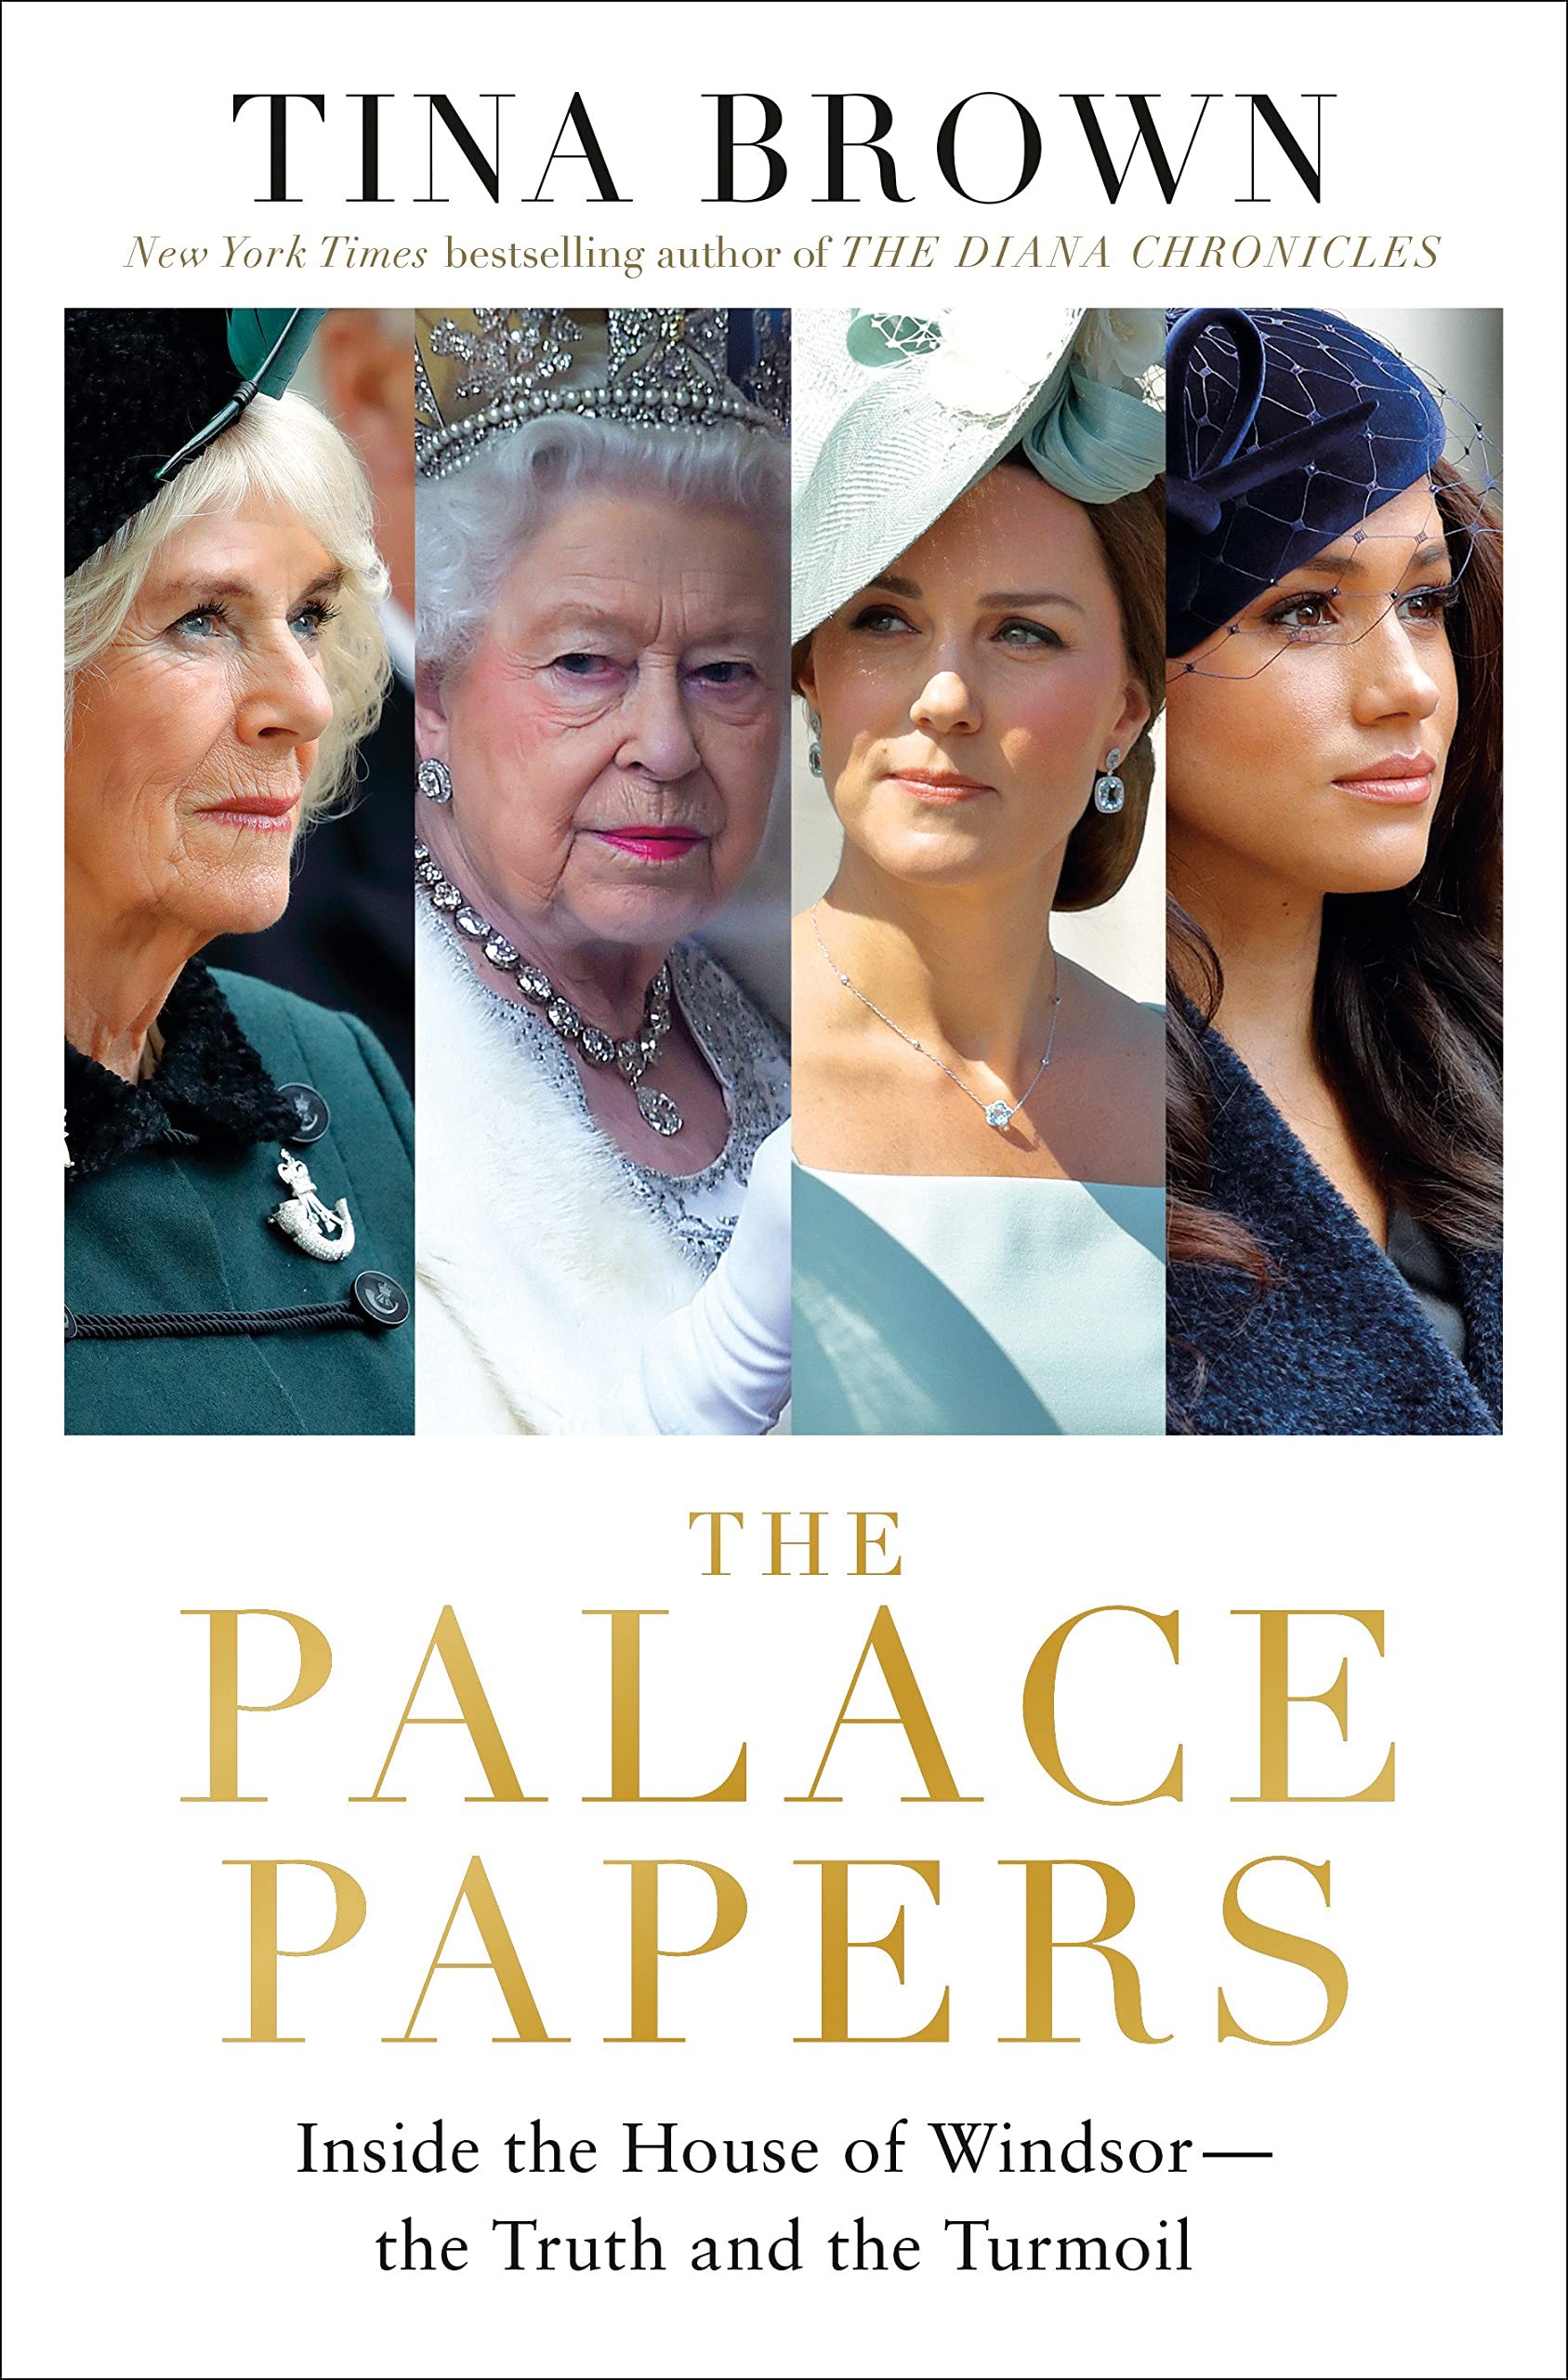 Cover of The Palace Papers, Tina Brown's work on the British royal family (Photo: Revelation)